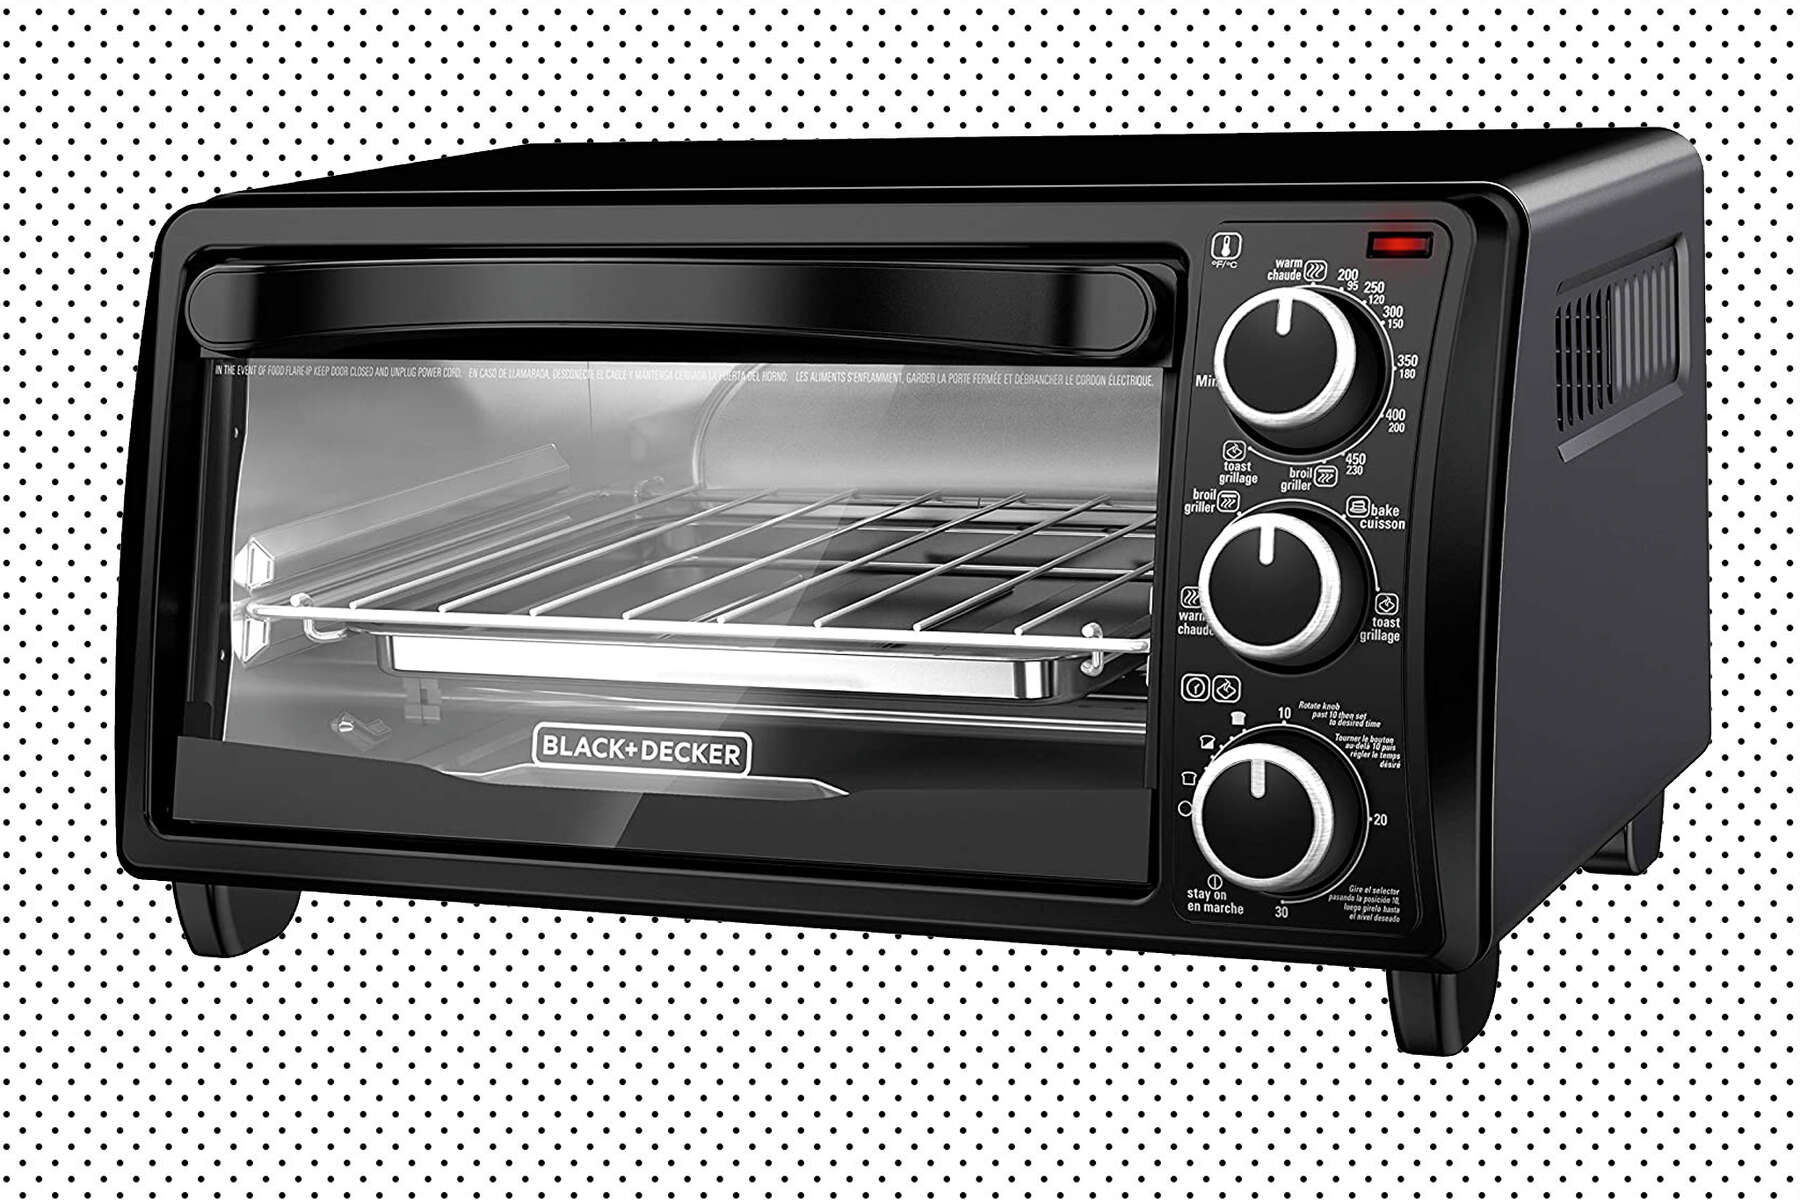 This $28 Black + Decker toaster oven is the inexpensive upgrade